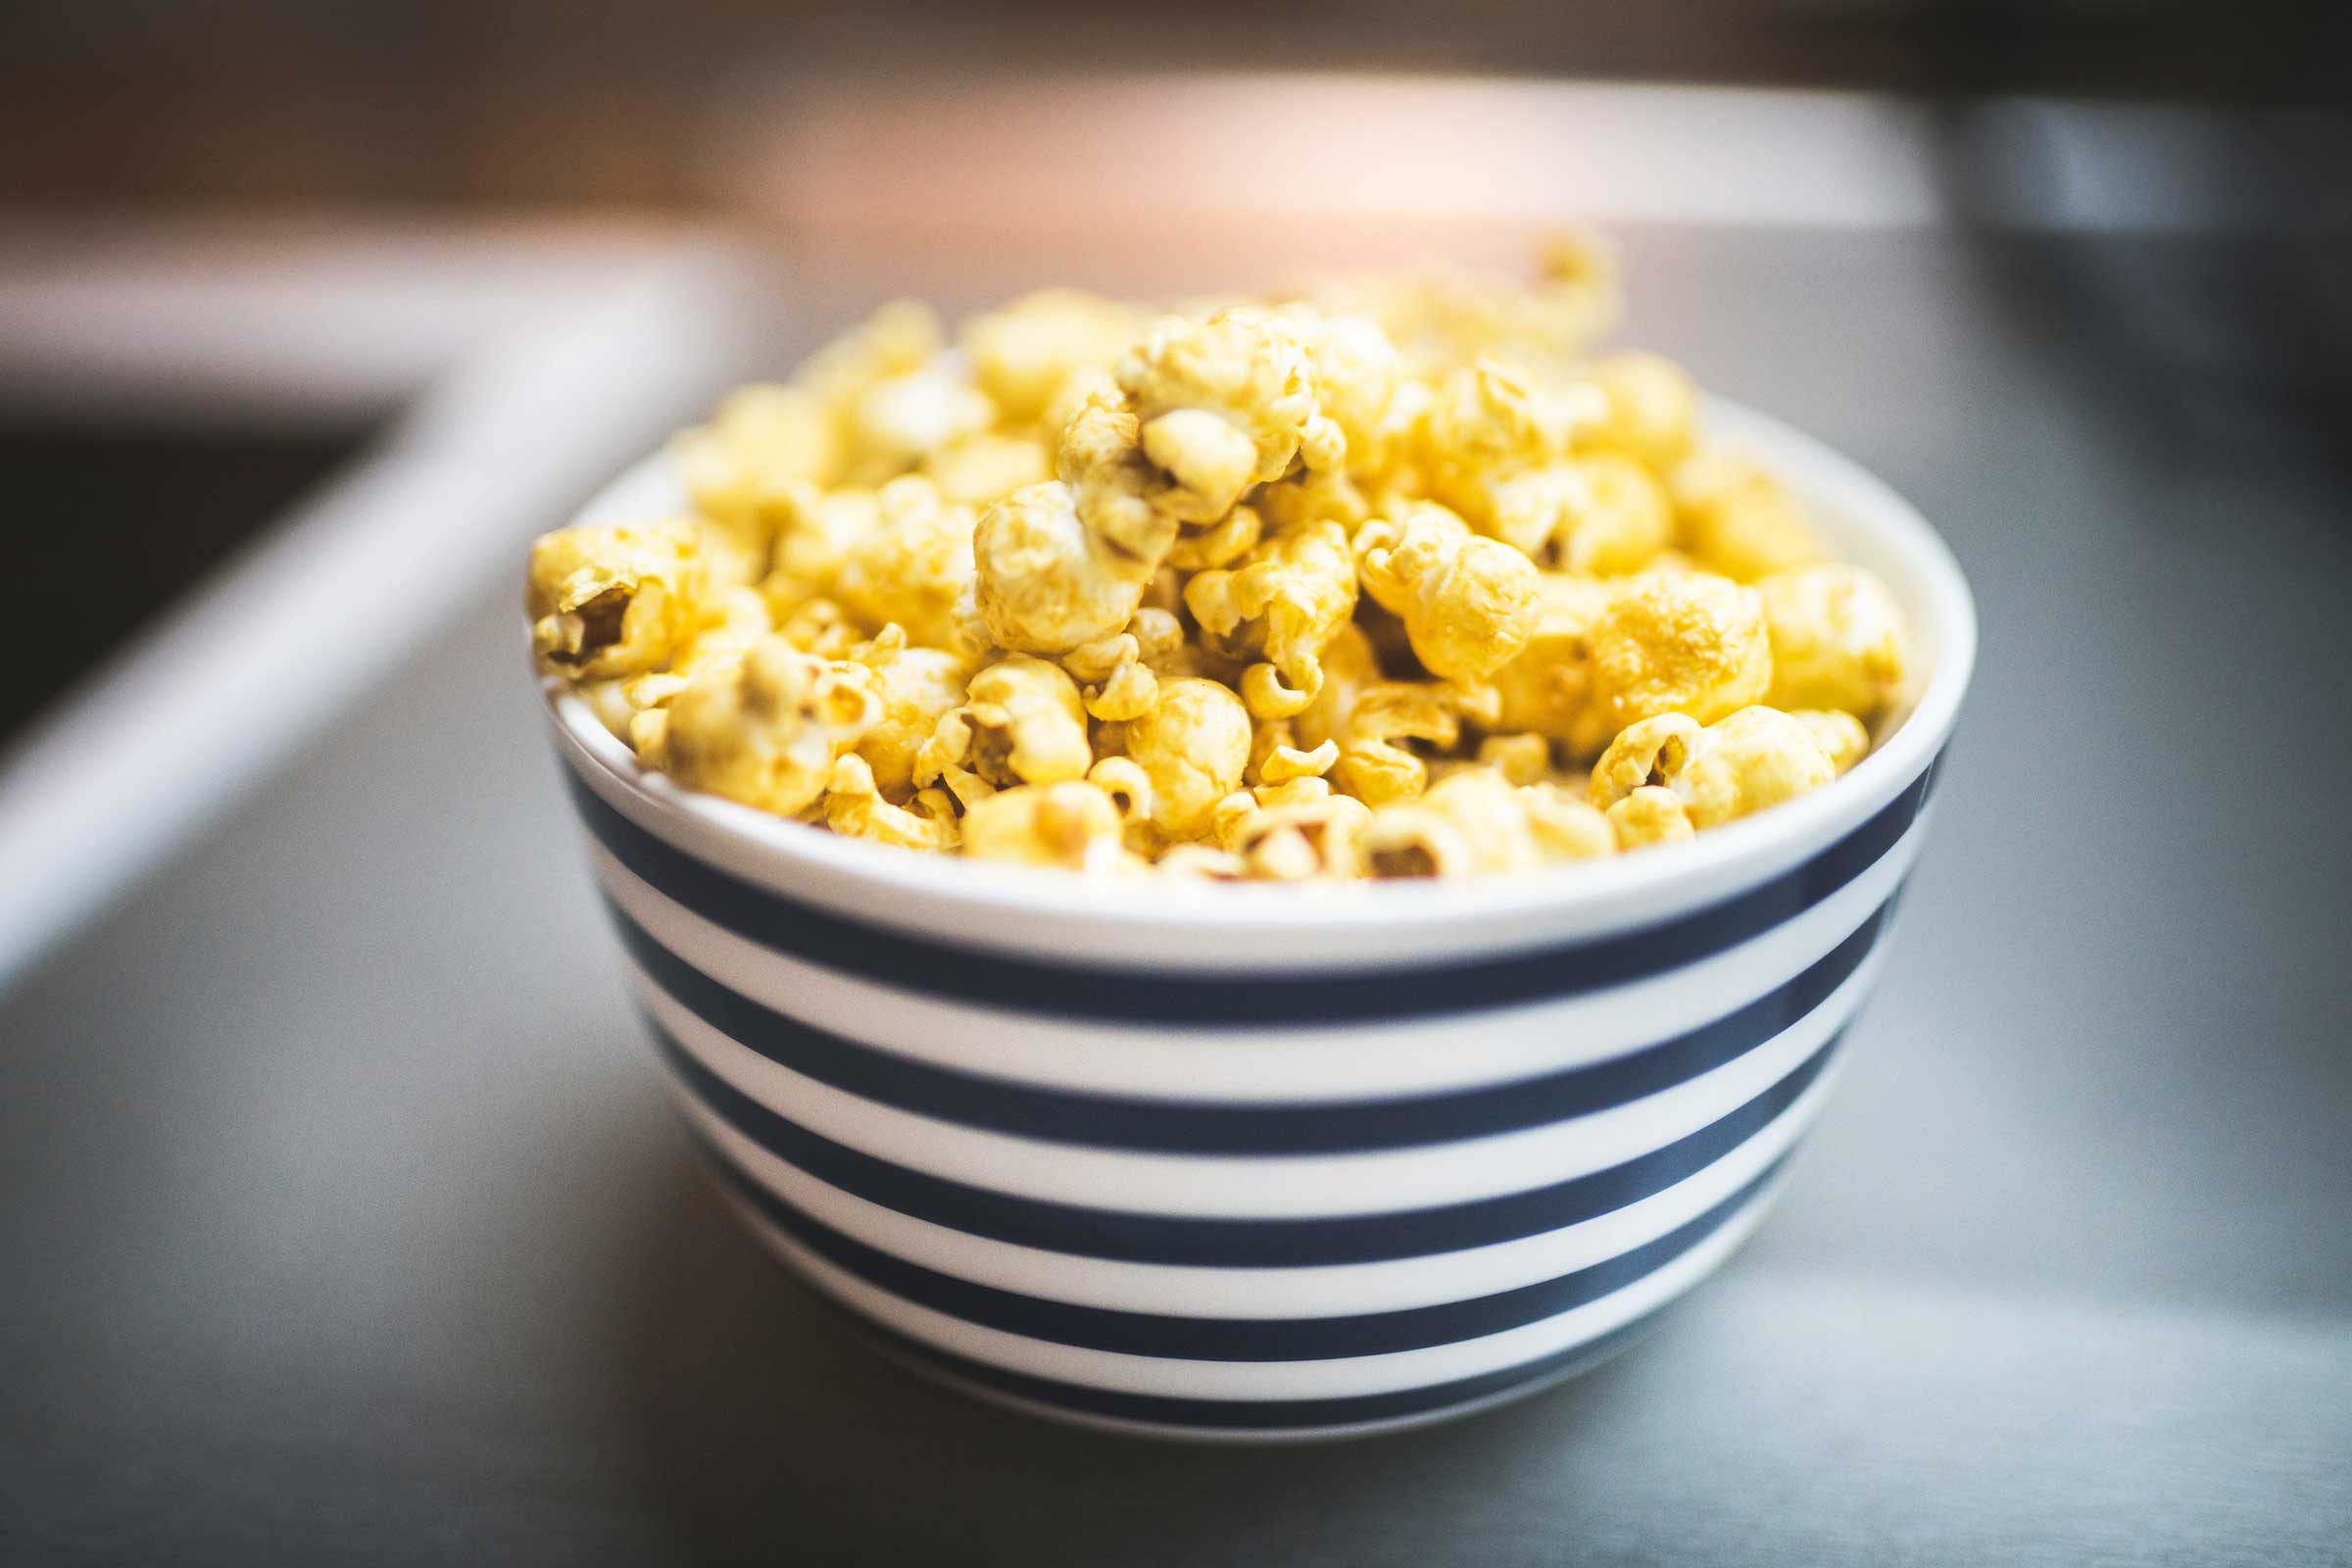 is popcorn a healthy food to eat